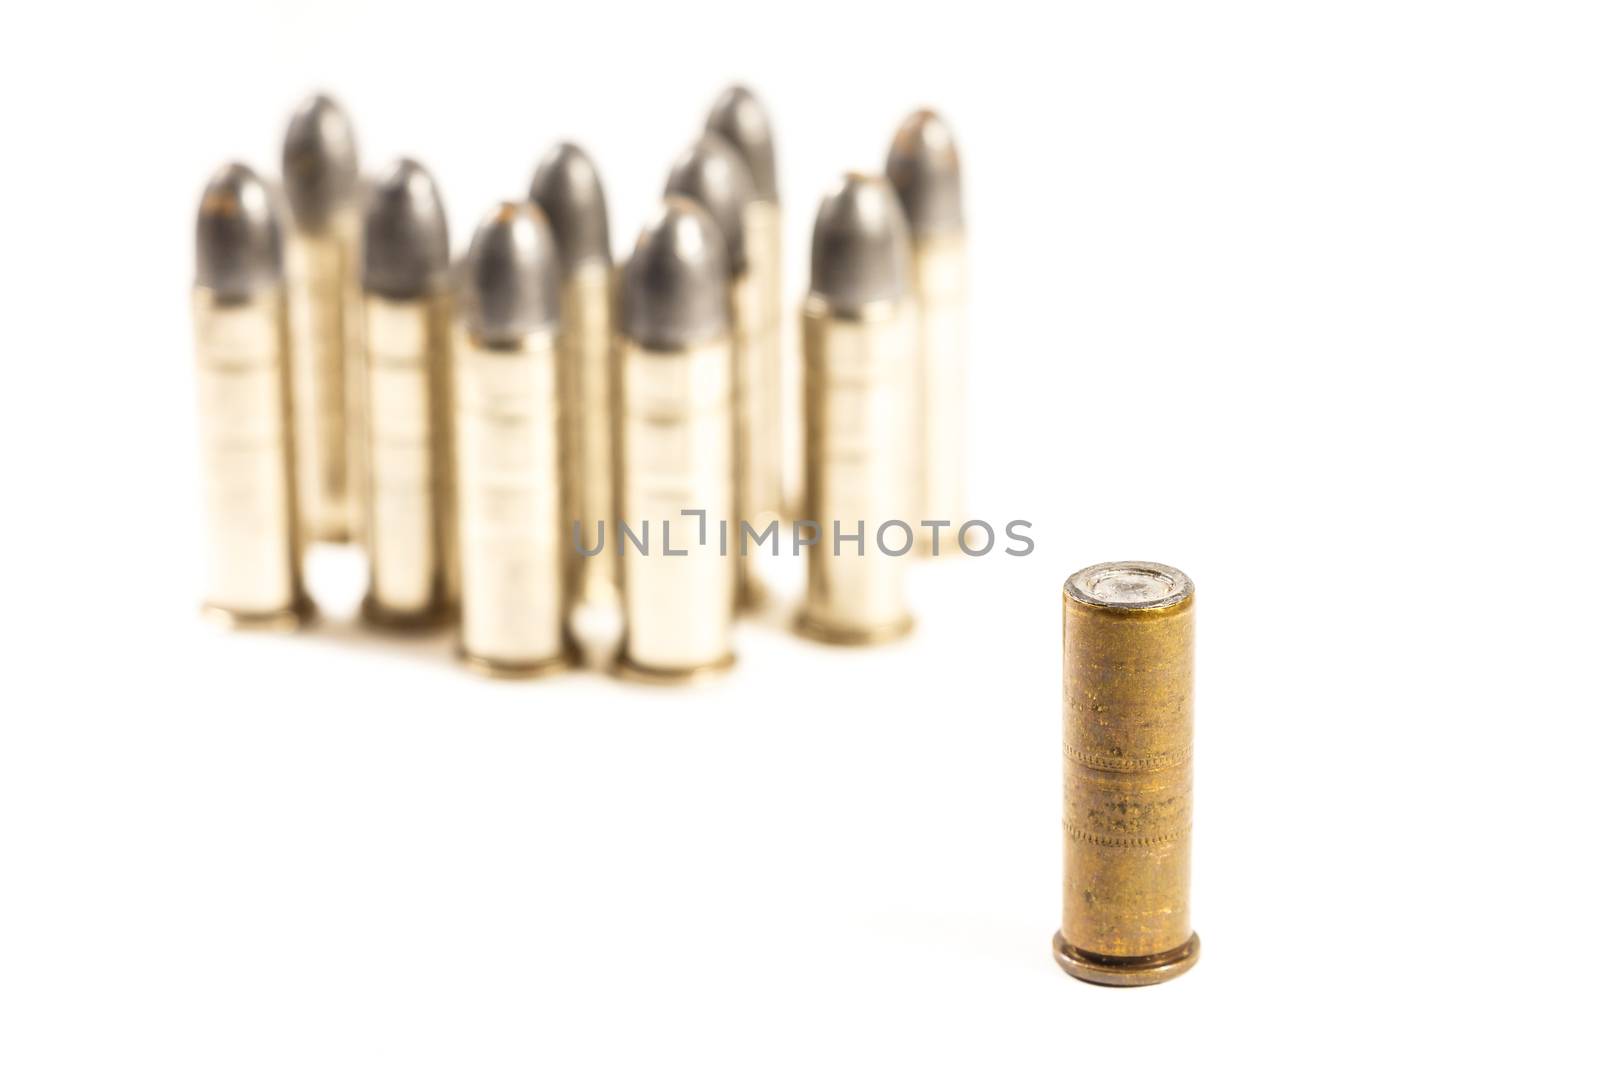 Think different (group of bullets and single bullet by stockdevil